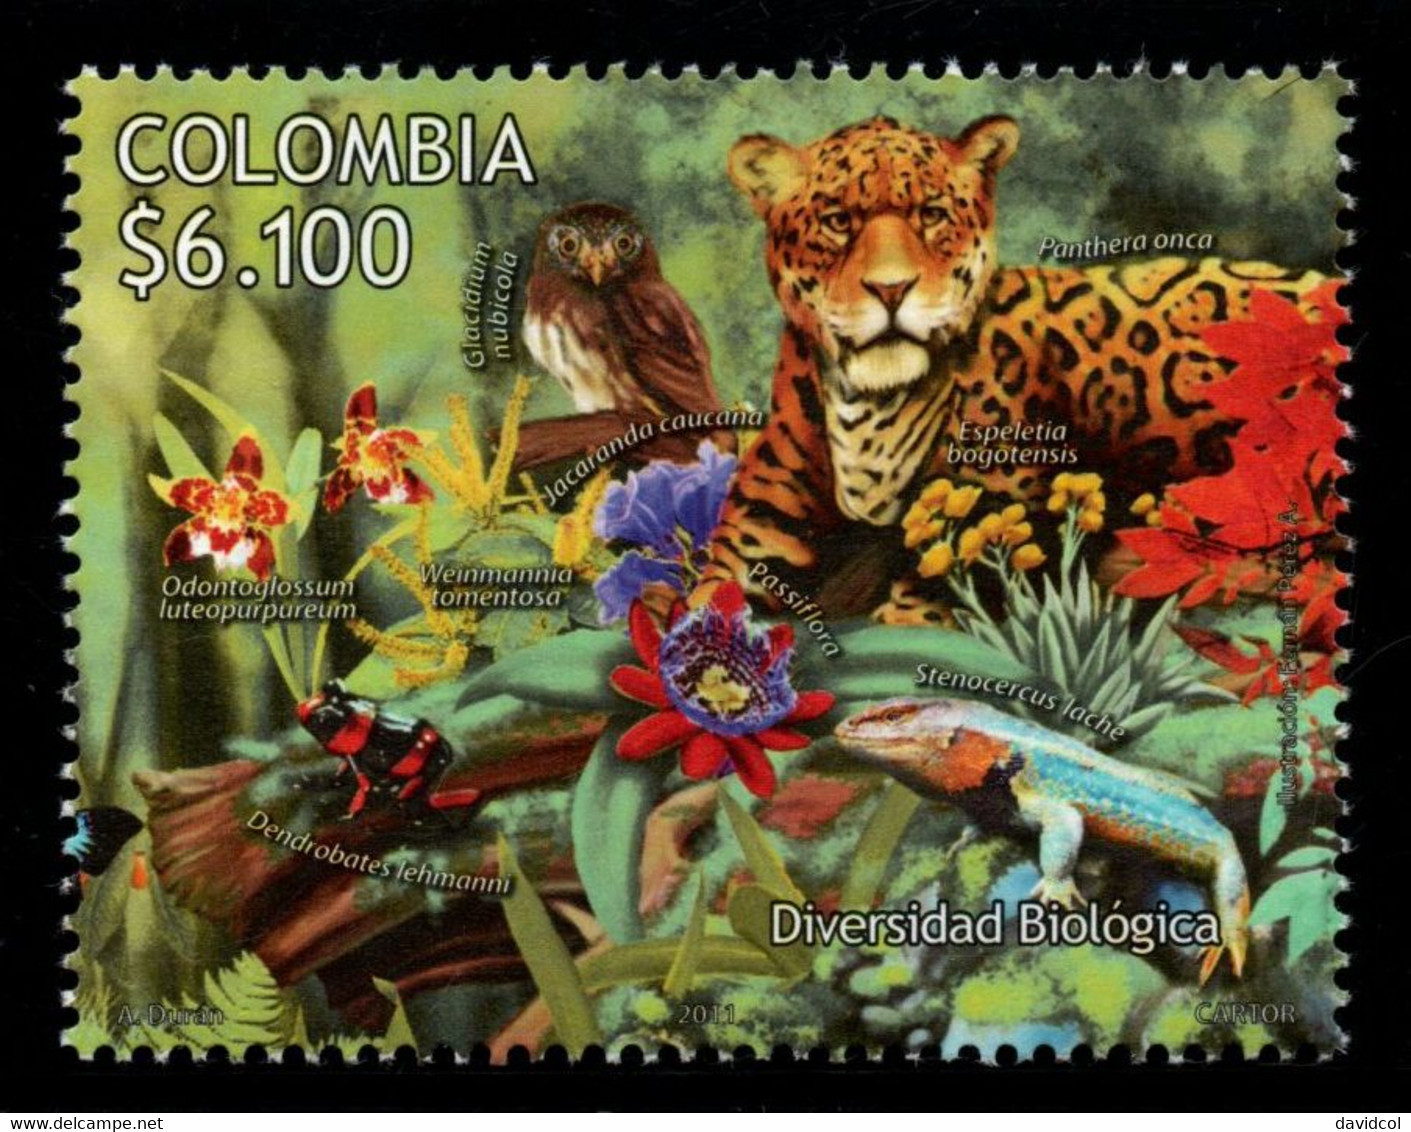 04A-KOLUMBIEN - 2011 -MNH - ORCHIDS, BEAR, JAGUAR,INSECTS, FISH. BIODIVERSITY IN COLOMBIA - Colombia